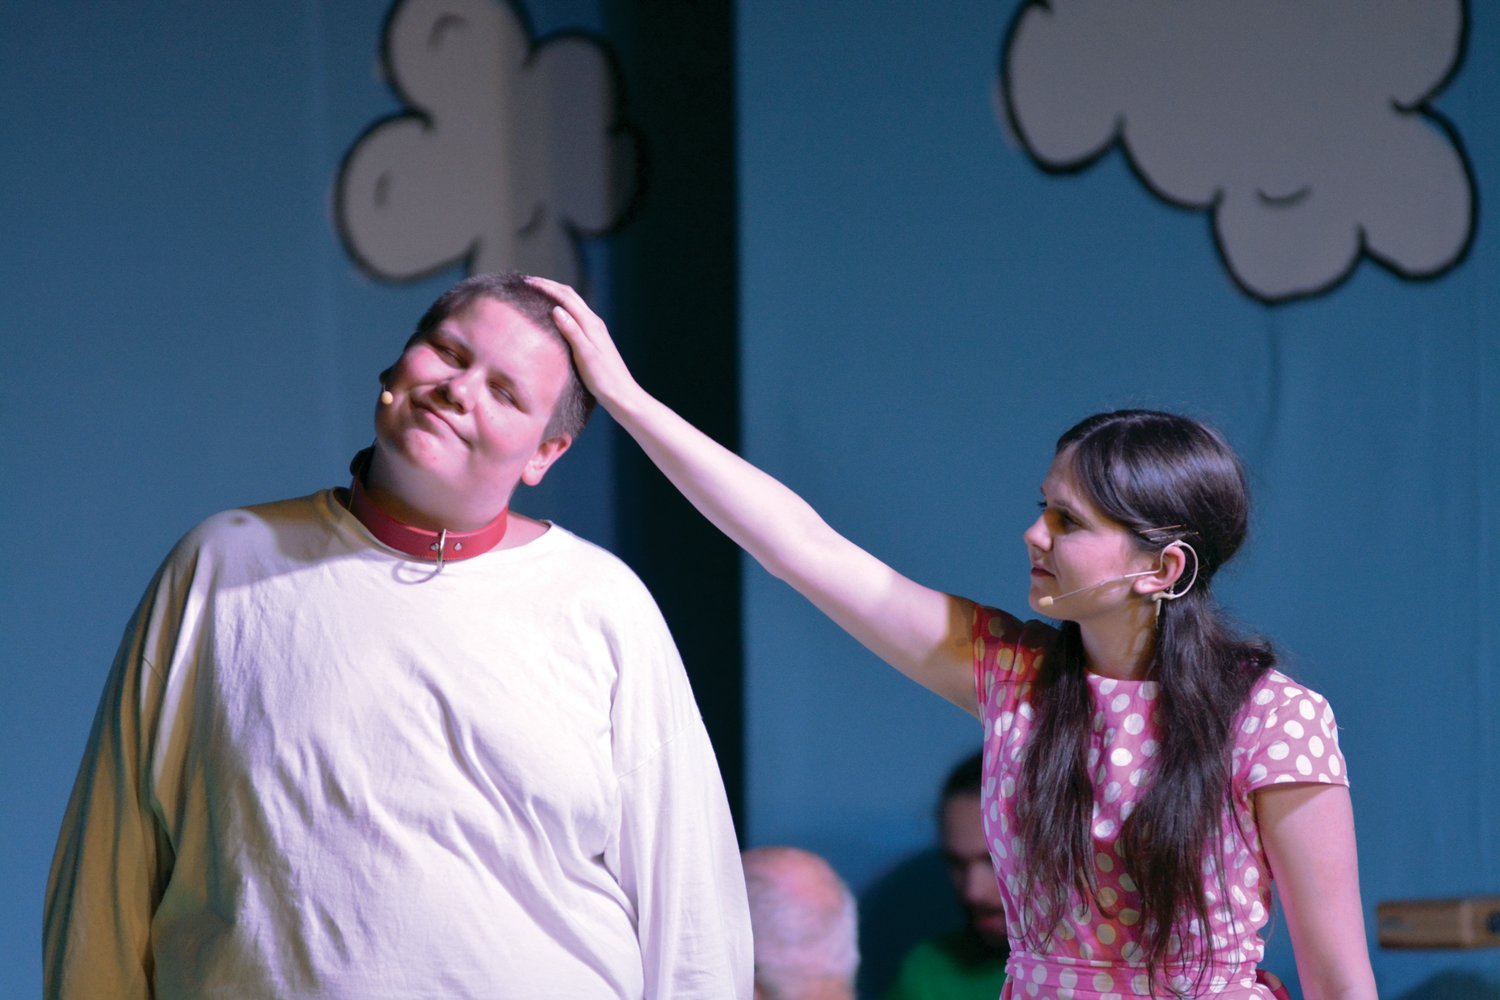 Sally Brown gives a pat on the head to Snoopy in a scene during “You’re a Good Man, Charlie Brown,” on July 28.